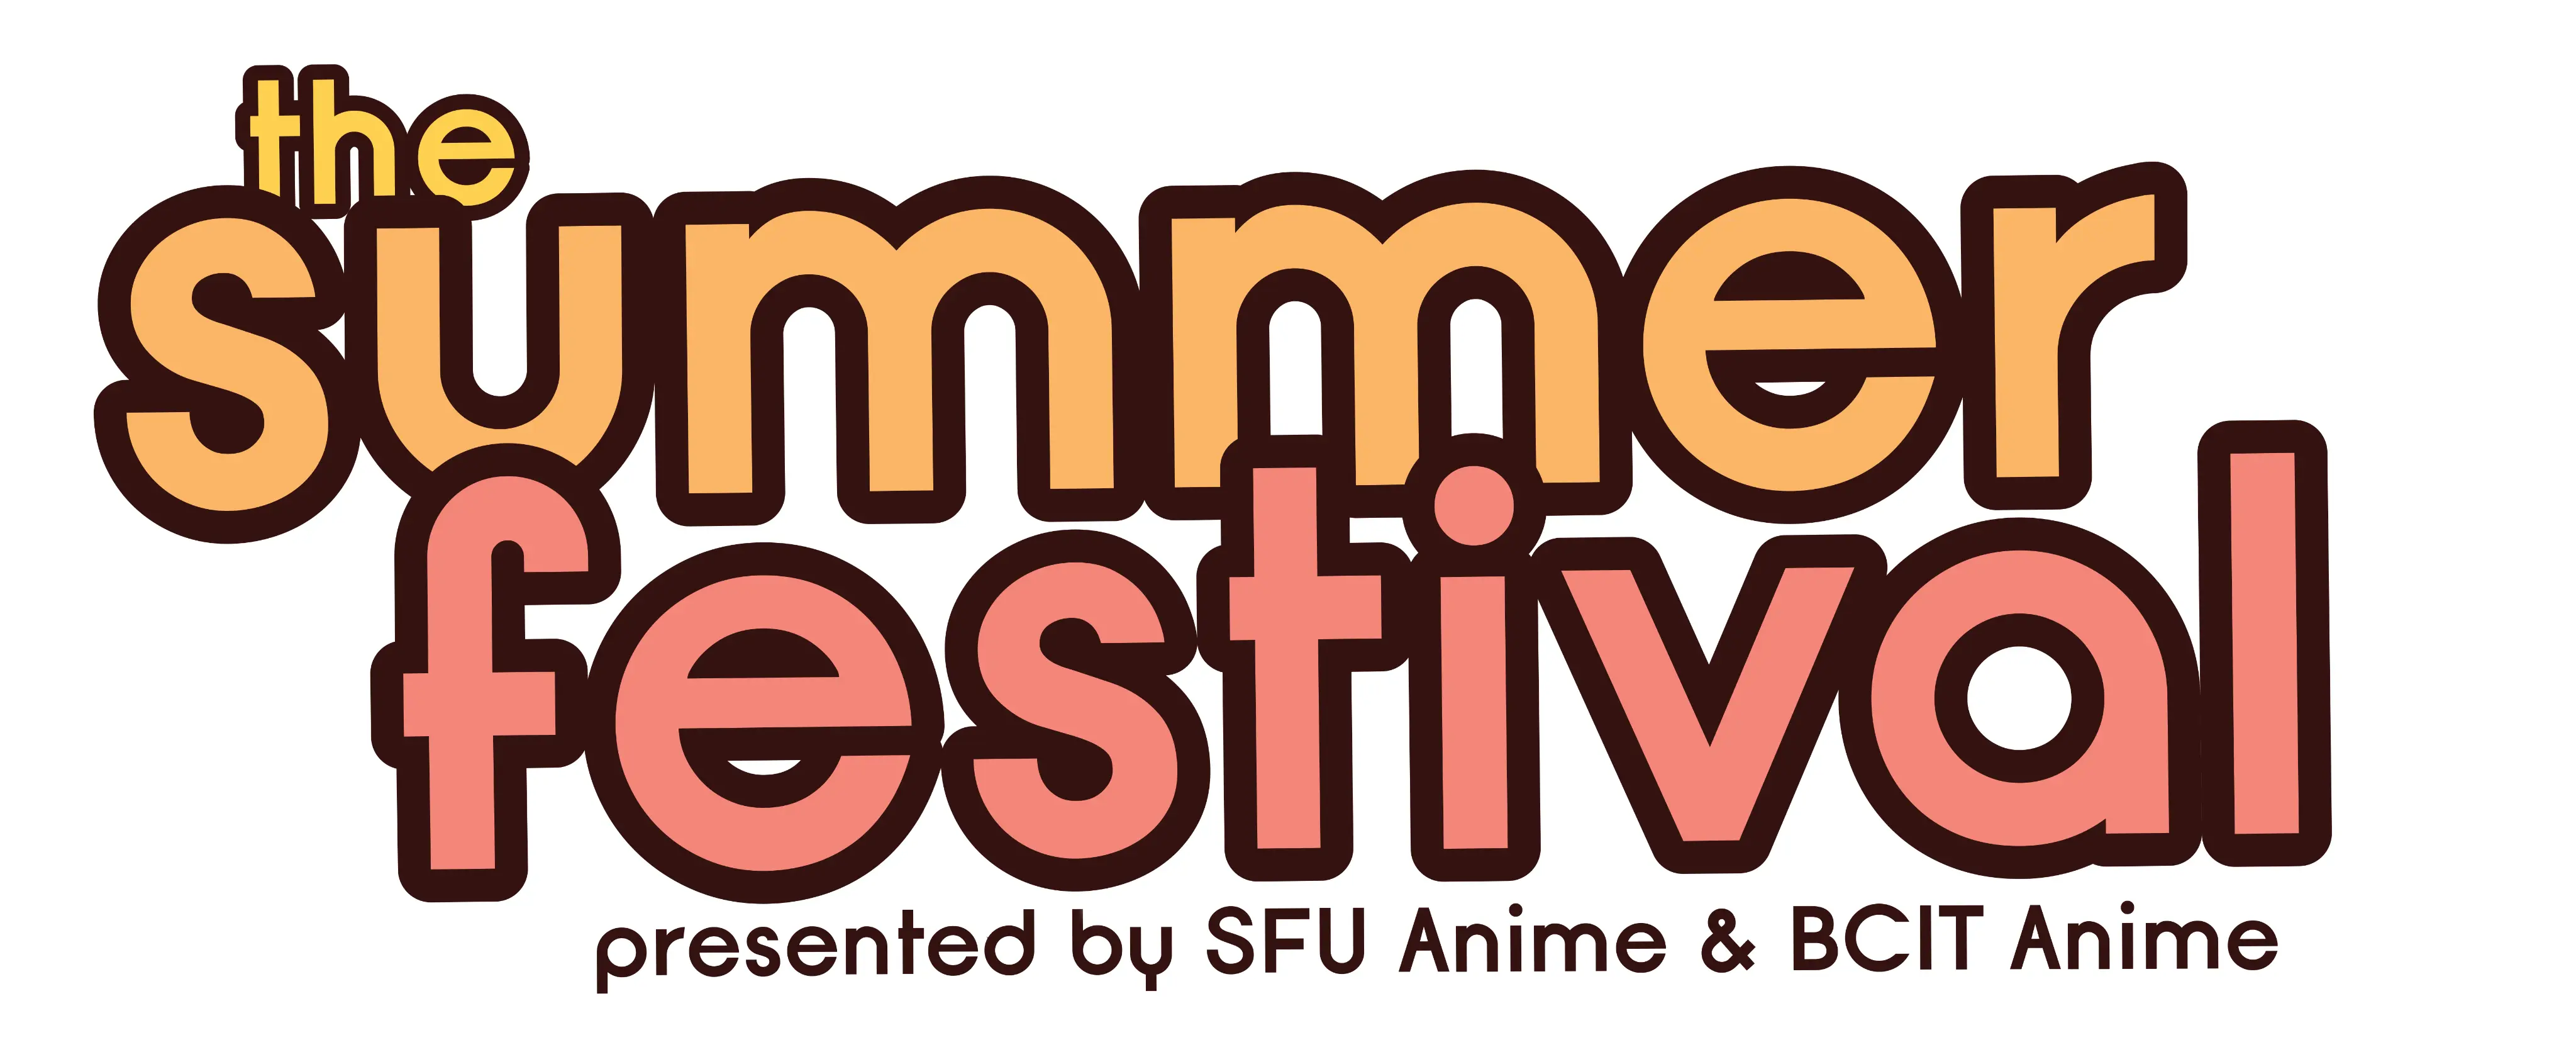 Logo of The Summer Festival presented by SFU Anime